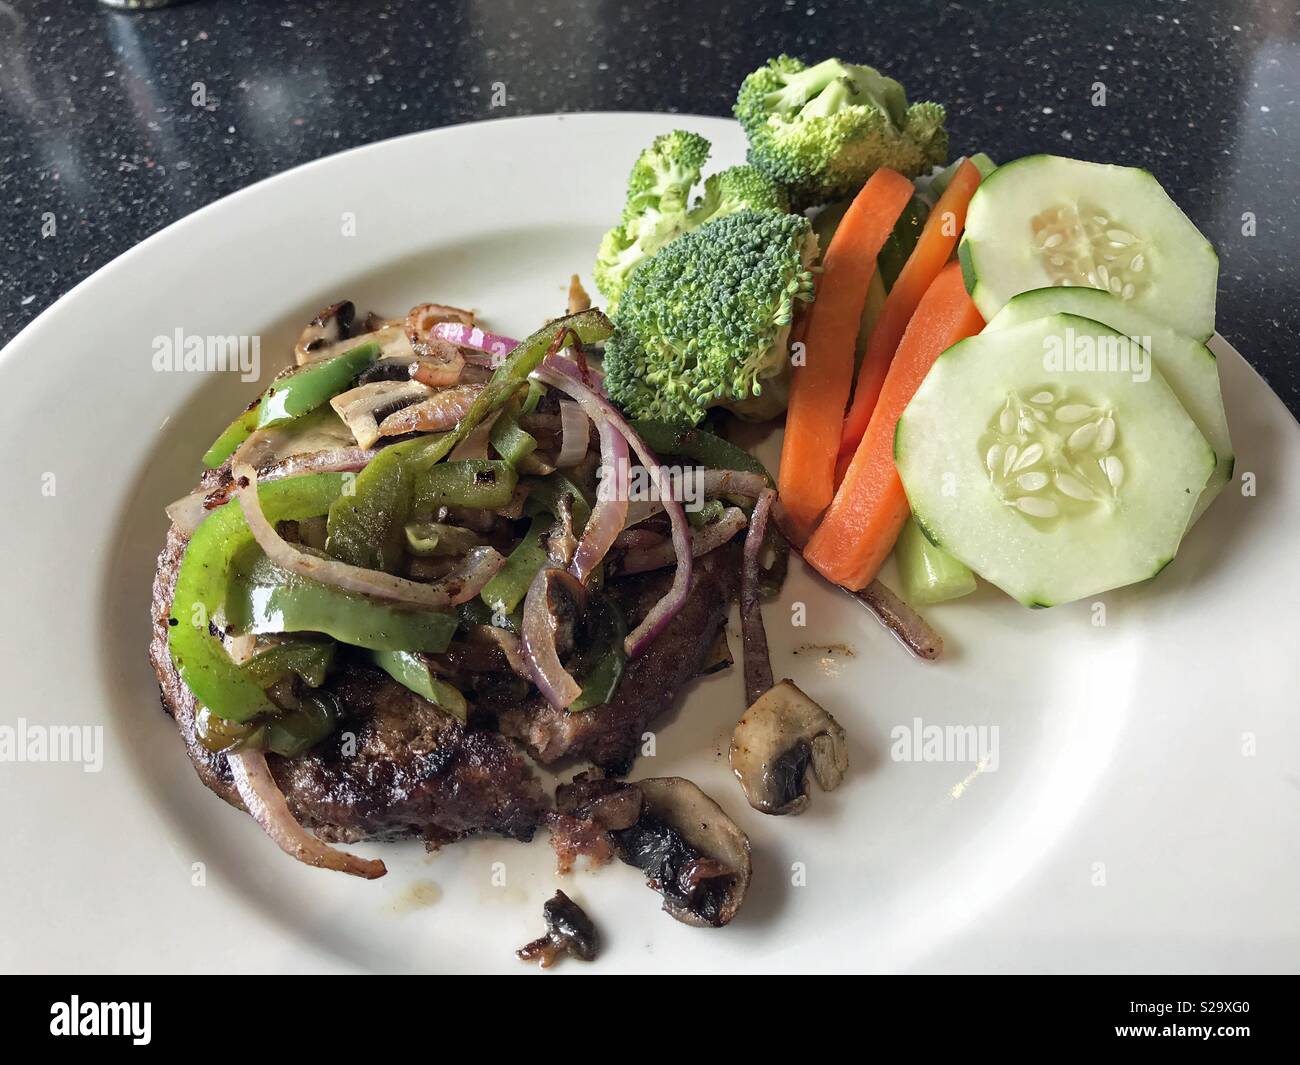 Low carb meal of hamburger topped with grilled onion, bell pepper and mushrooms with a side of raw broccoli, cucumbers, carrots and red bell peppers. Stock Photo